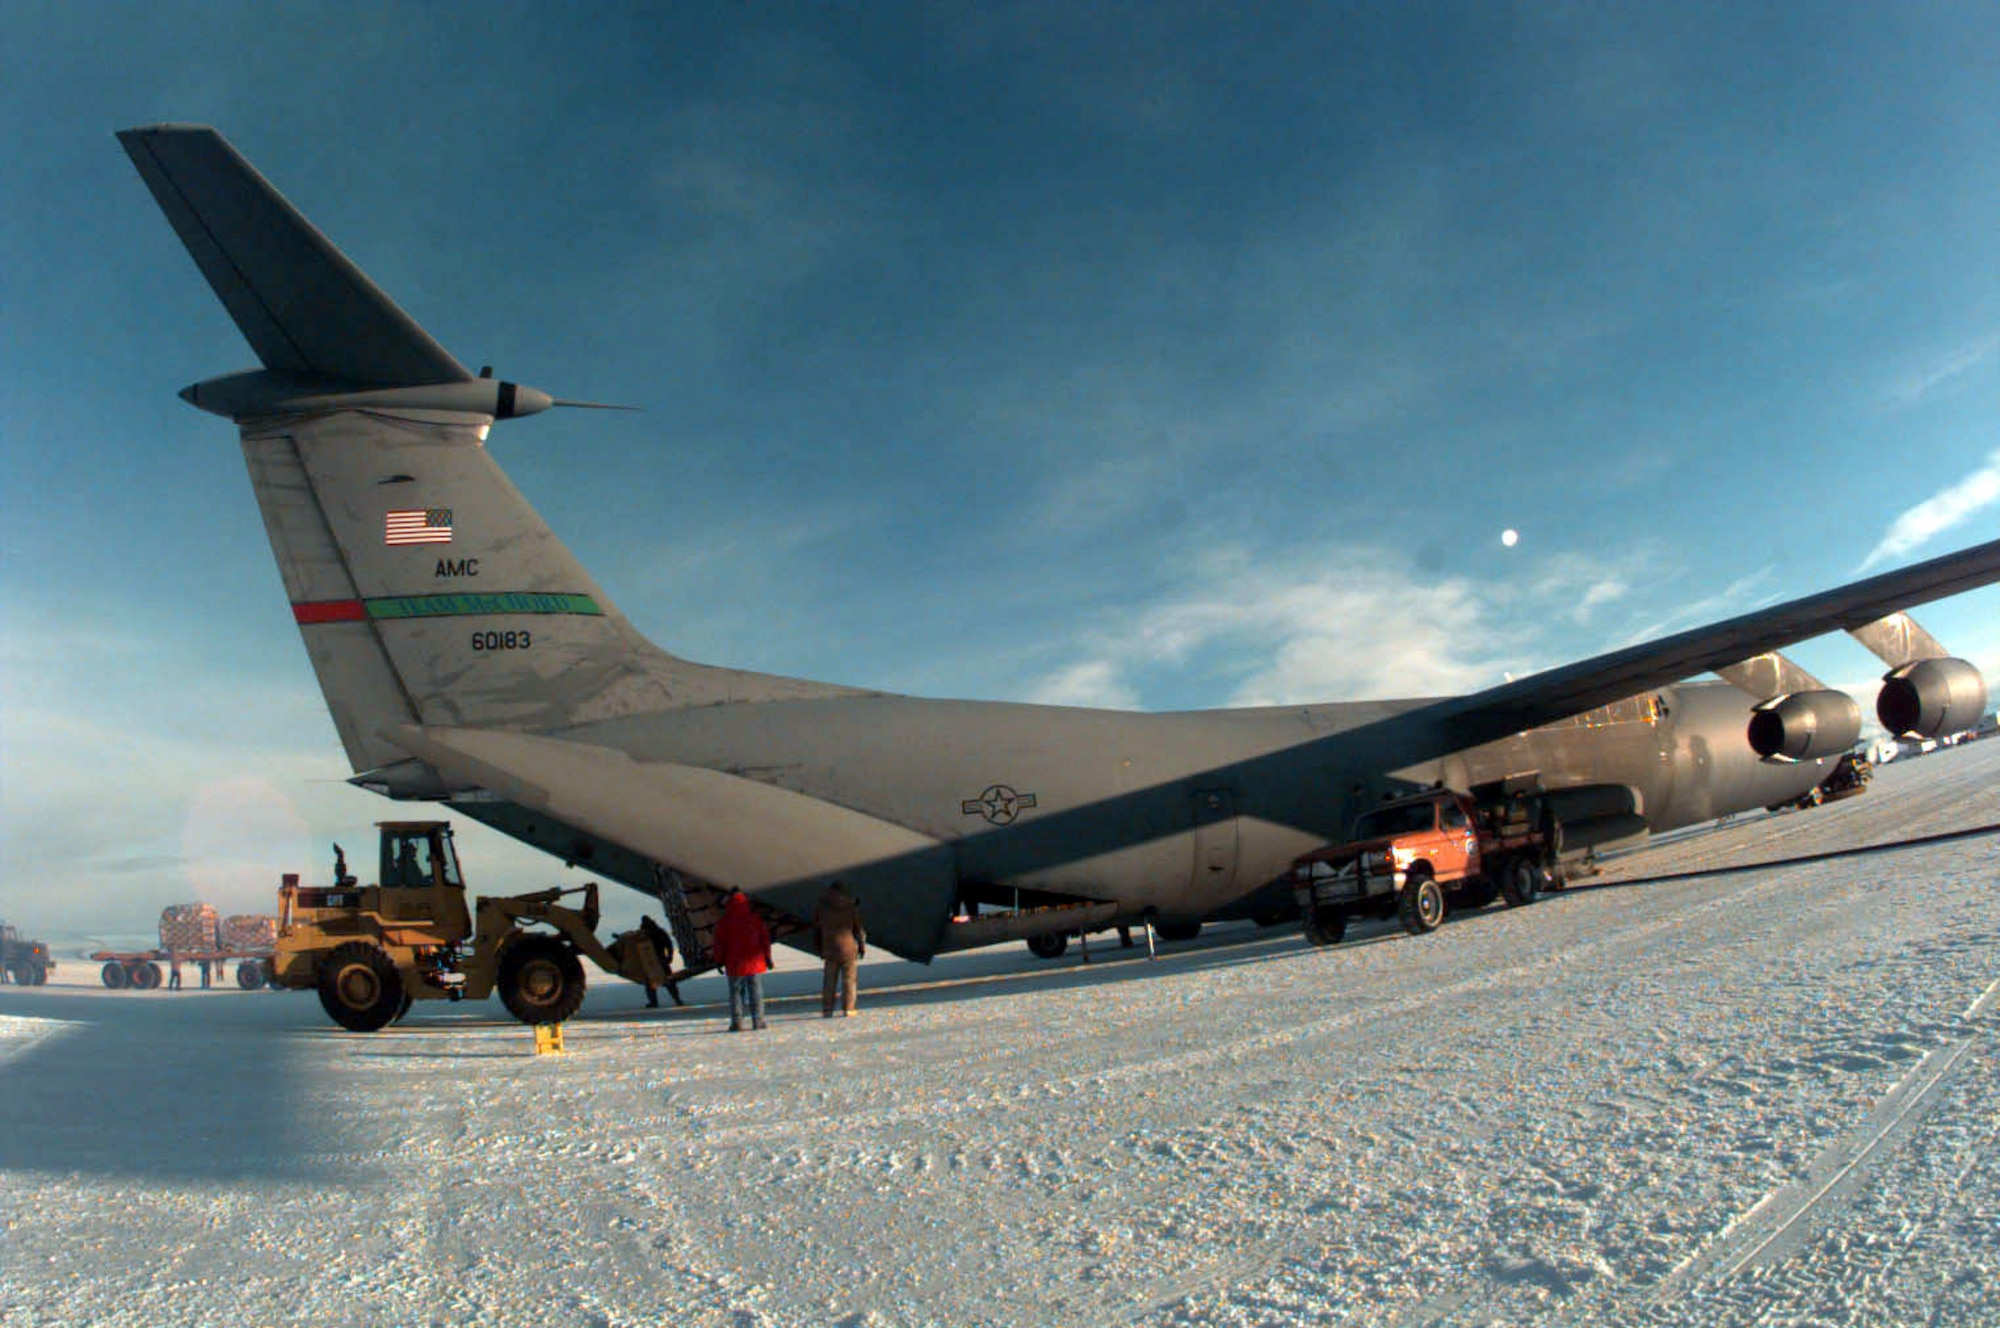 MCMURDO STATION, Antarctica -- In this 1997 photo, cargo is offloaded from a C-141B Starlifter from McChord Air Force Base, Wash., while parked on a runway of ice here. The cargo and passengers transported by C-141s as part of Operation Deep Freeze were flown from New Zealand to Antarctica in support of scientific research at McMurdo and the South Pole. (U.S. Air Force photo)